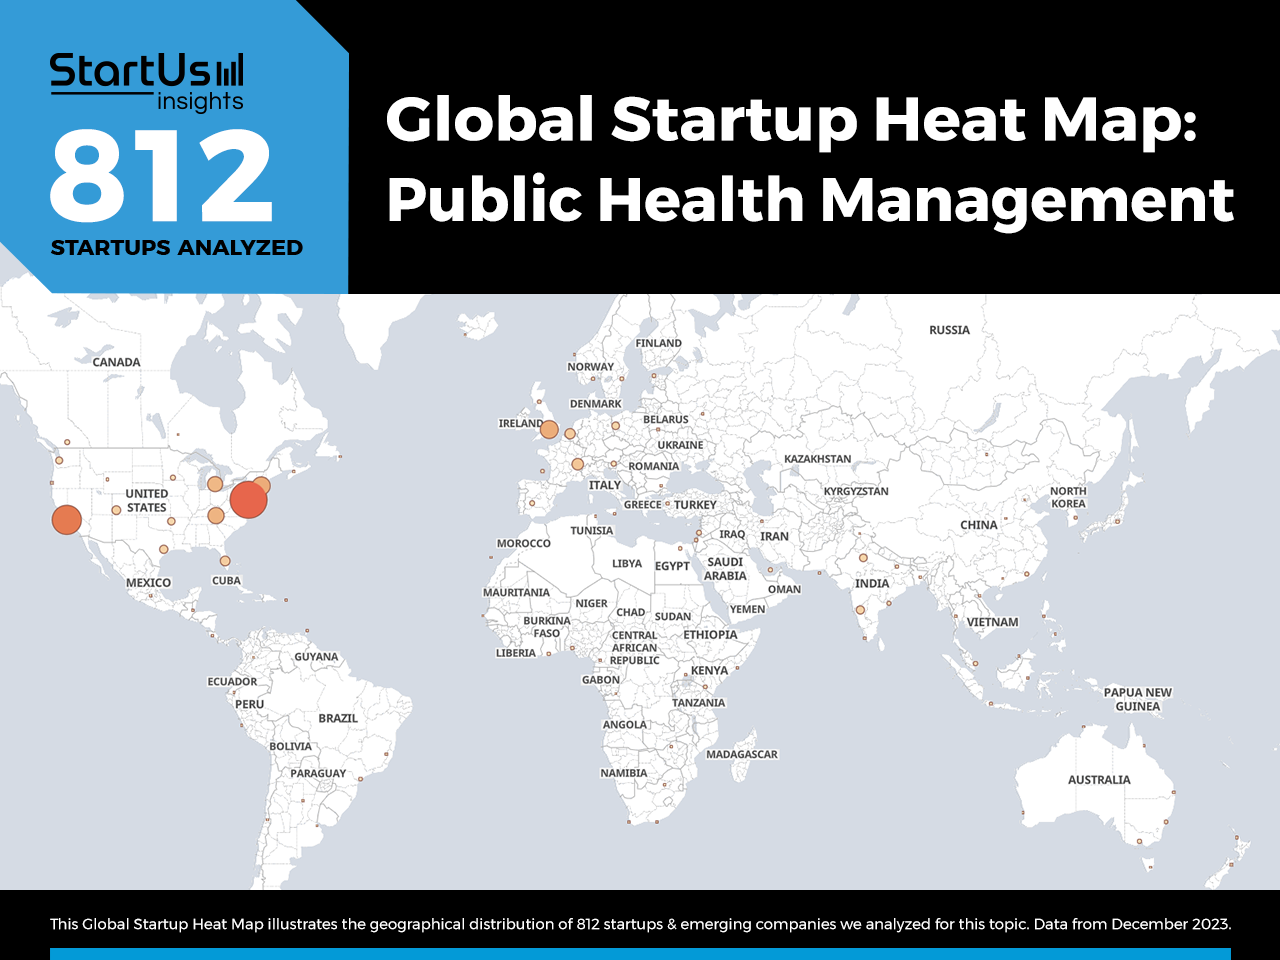 Public-Health-trends-Heat-Map-StartUs-Insights-noresize